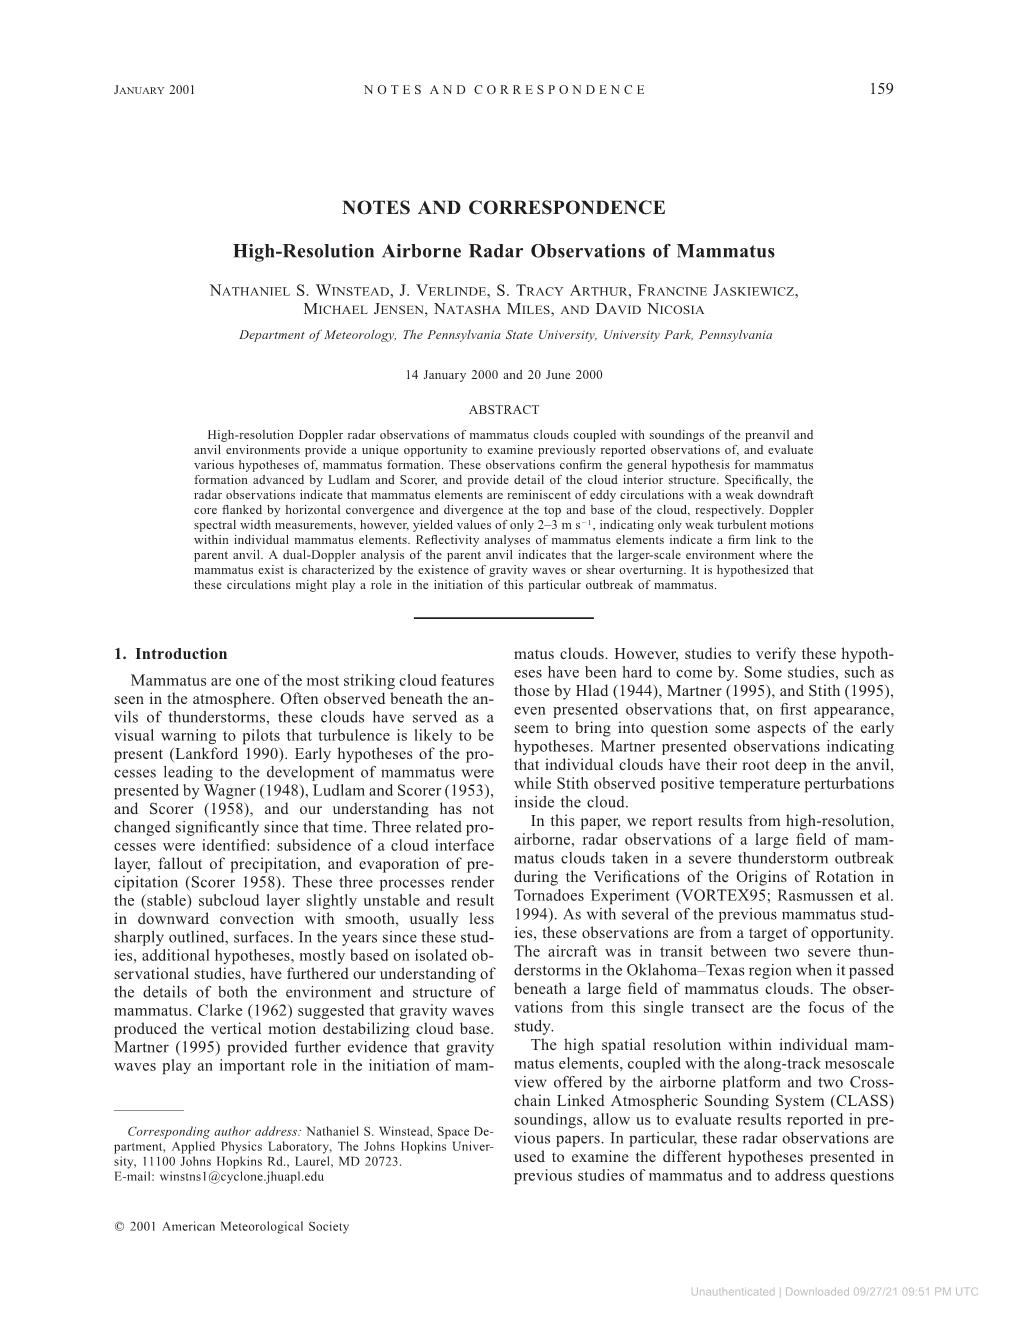 NOTES and CORRESPONDENCE High-Resolution Airborne Radar Observations of Mammatus